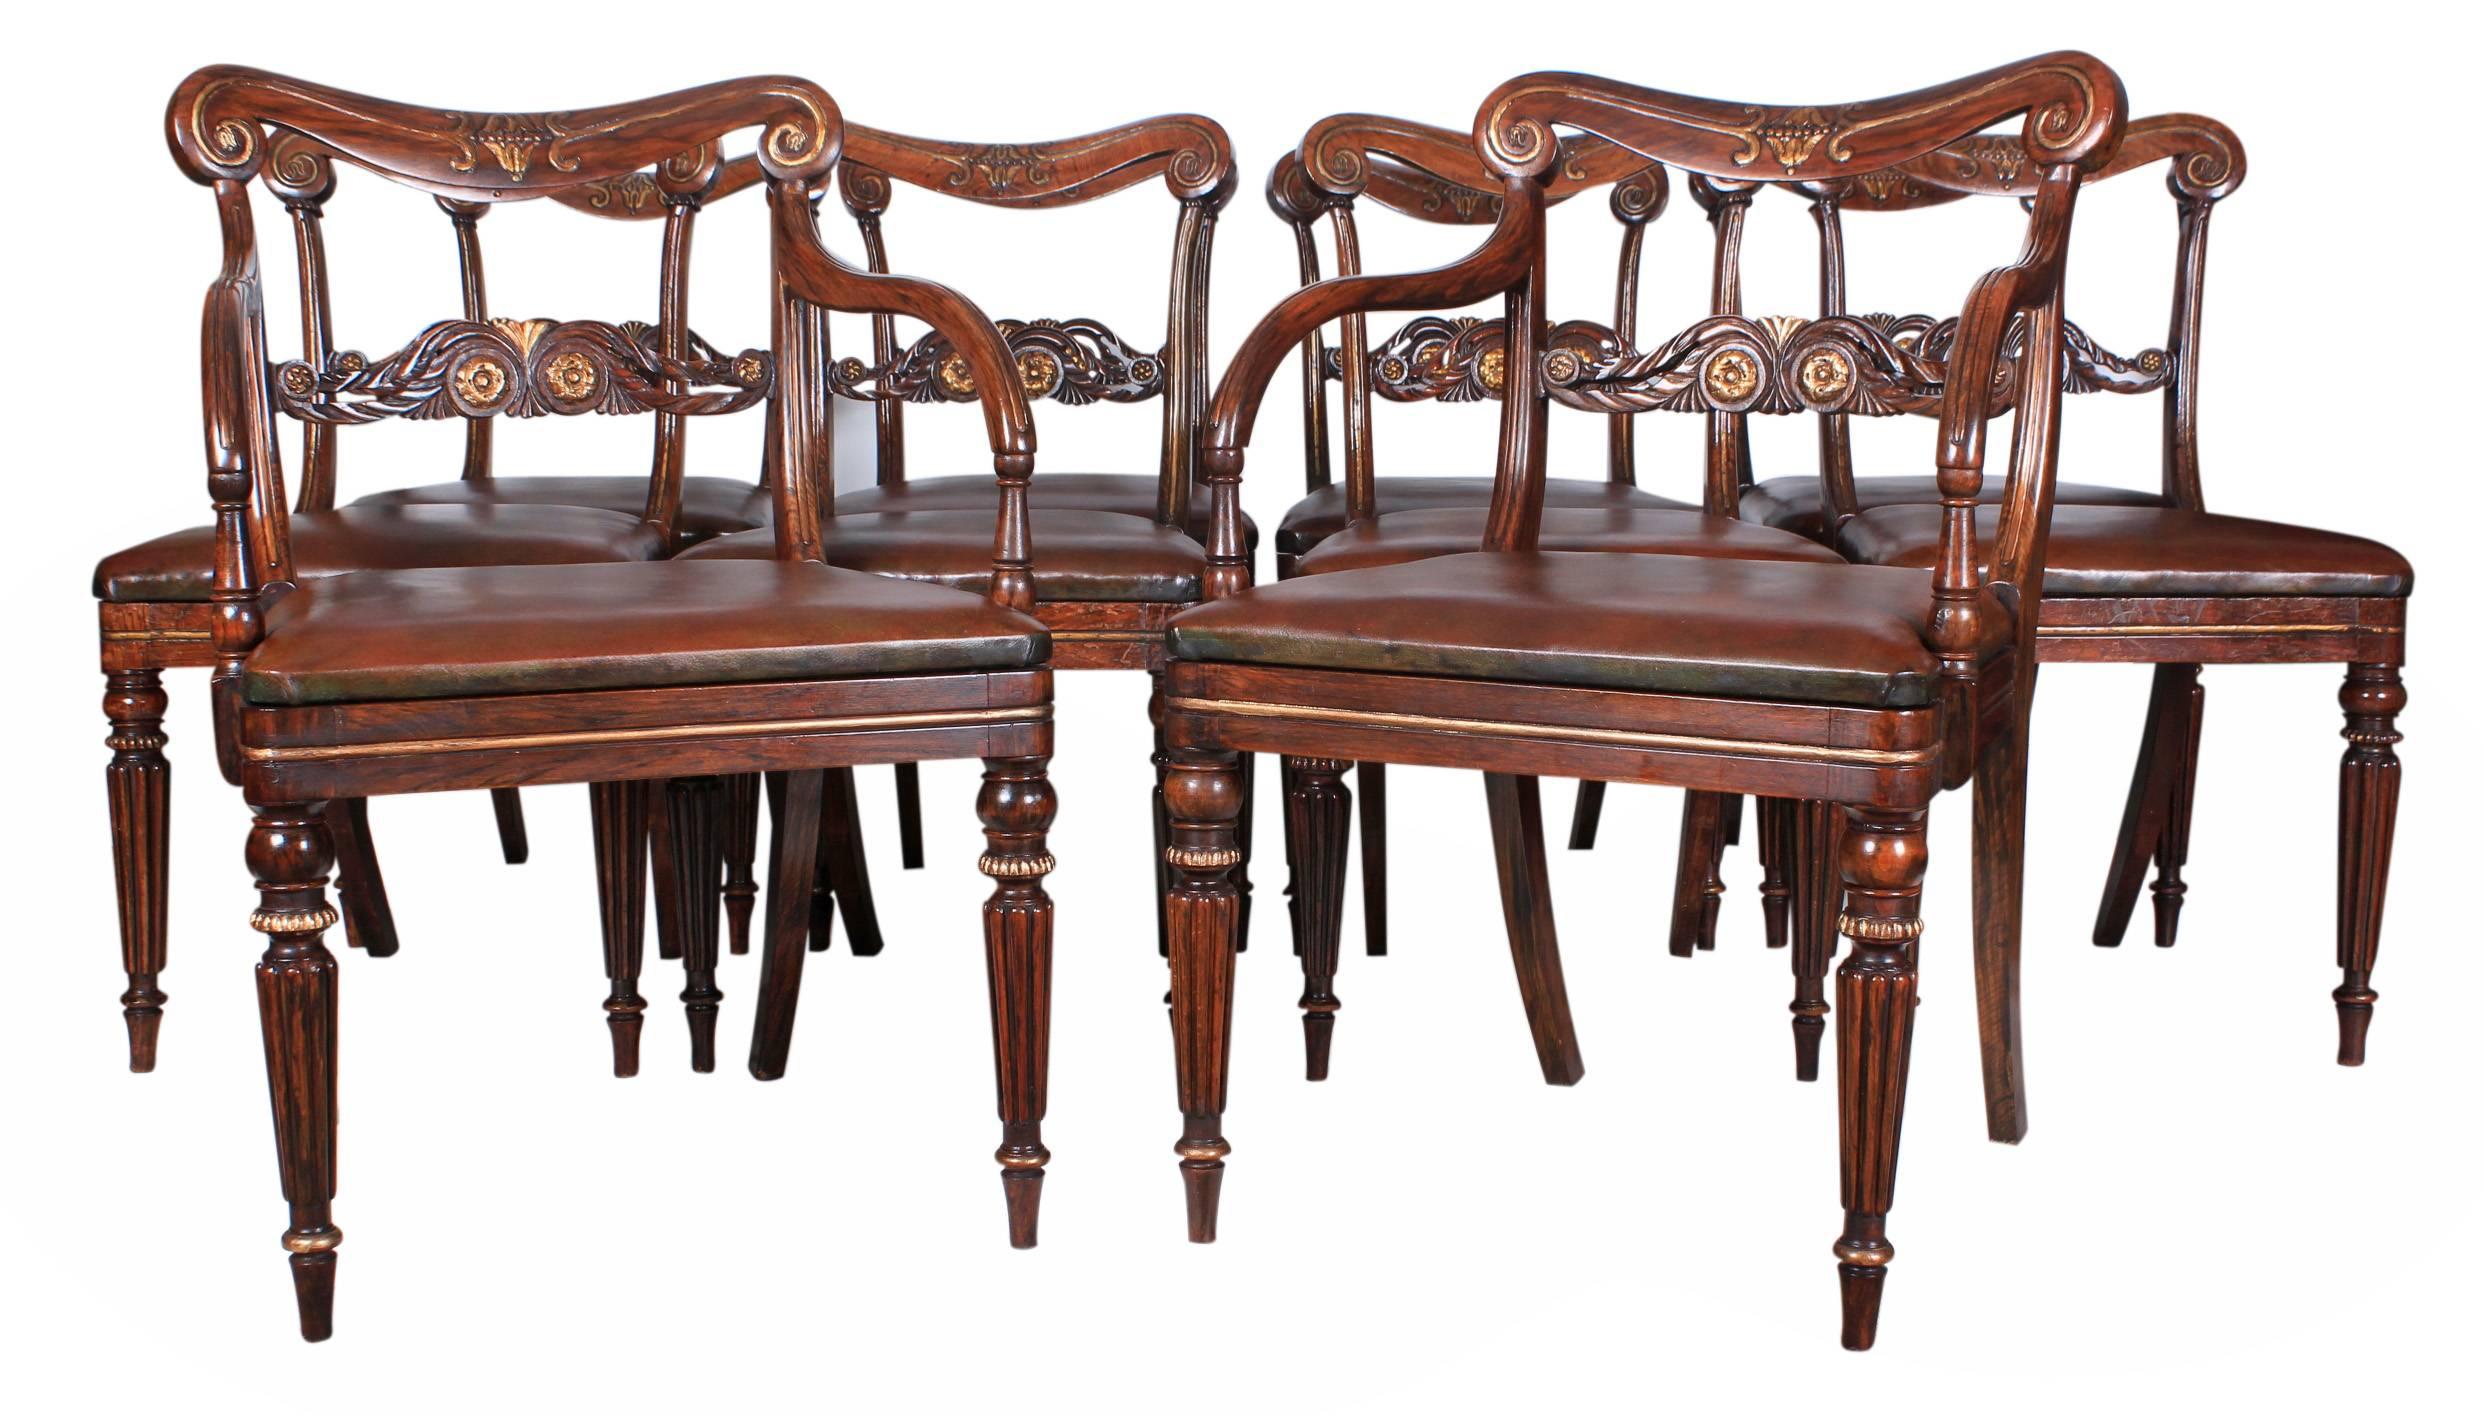 English, circa 1800.
An impressive set of ten Regency dining chairs offered in superb showroom condition.
Make no mistake, these chairs are stunning! A positive addition to any period home.
Newly upholstered brown quality leather seats.
Kidney